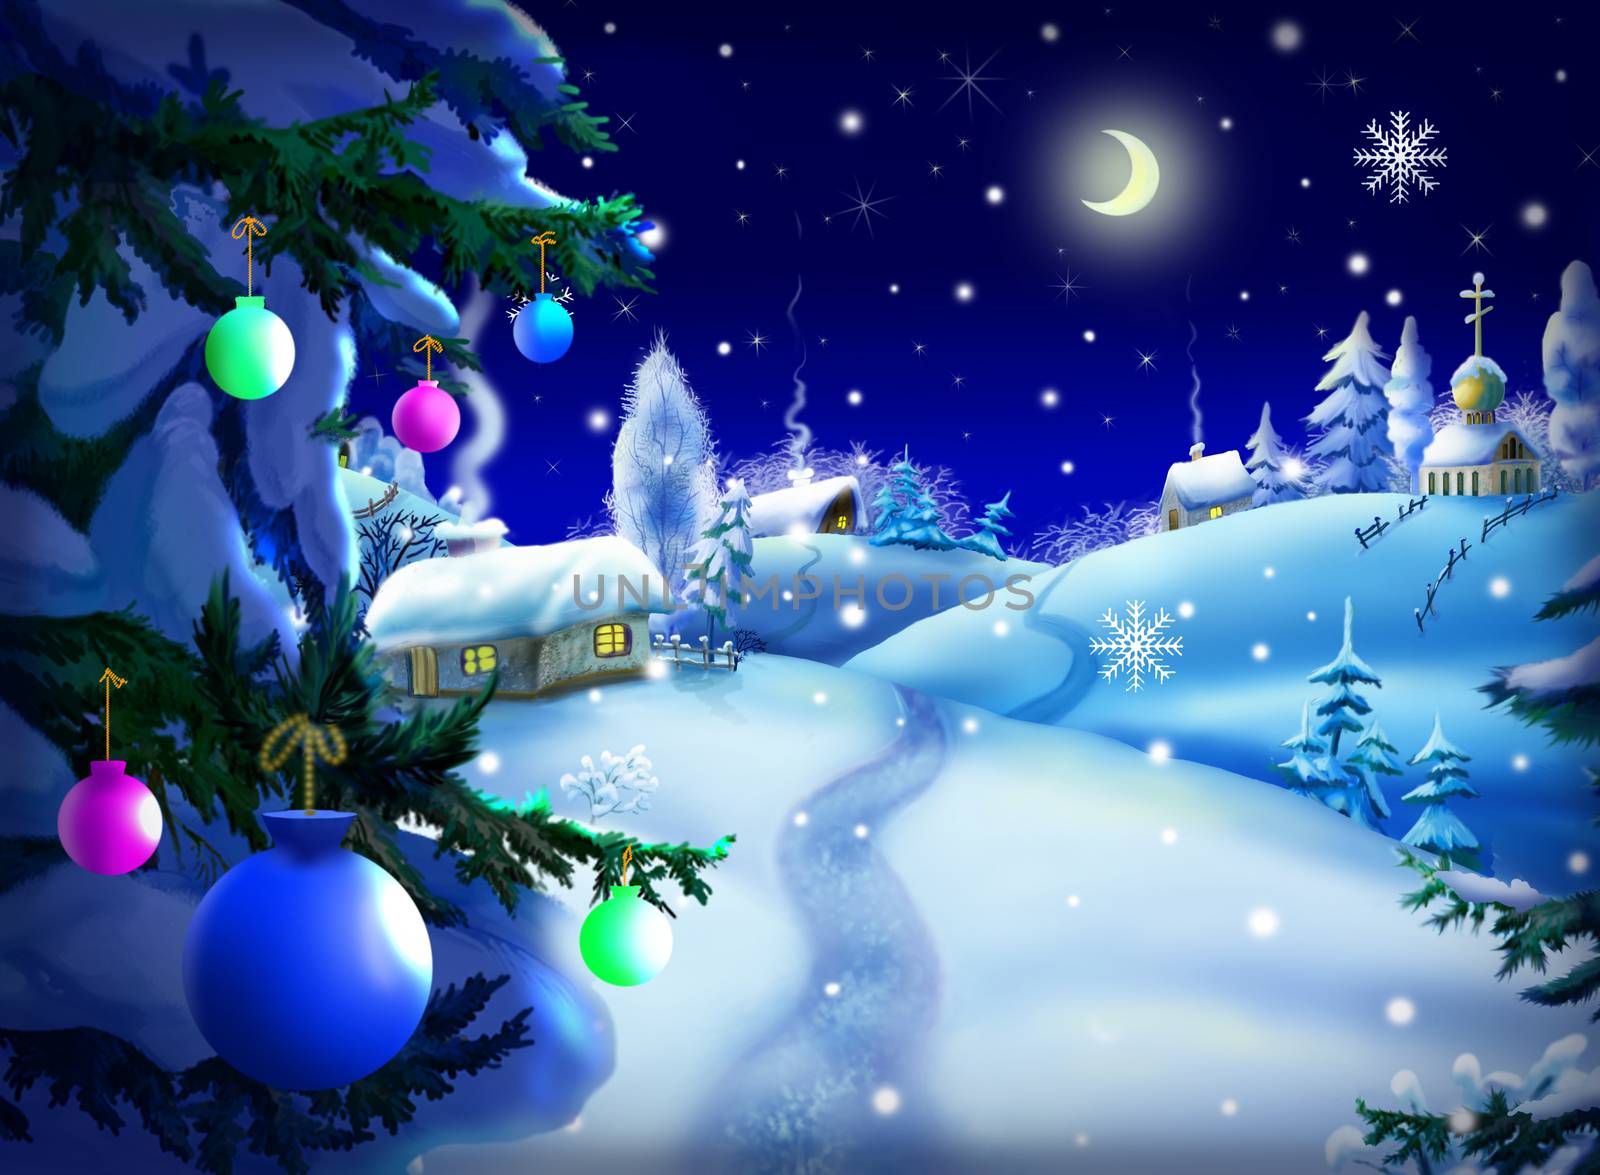 Magic Christmas & New Year Night Landscape by Multipedia